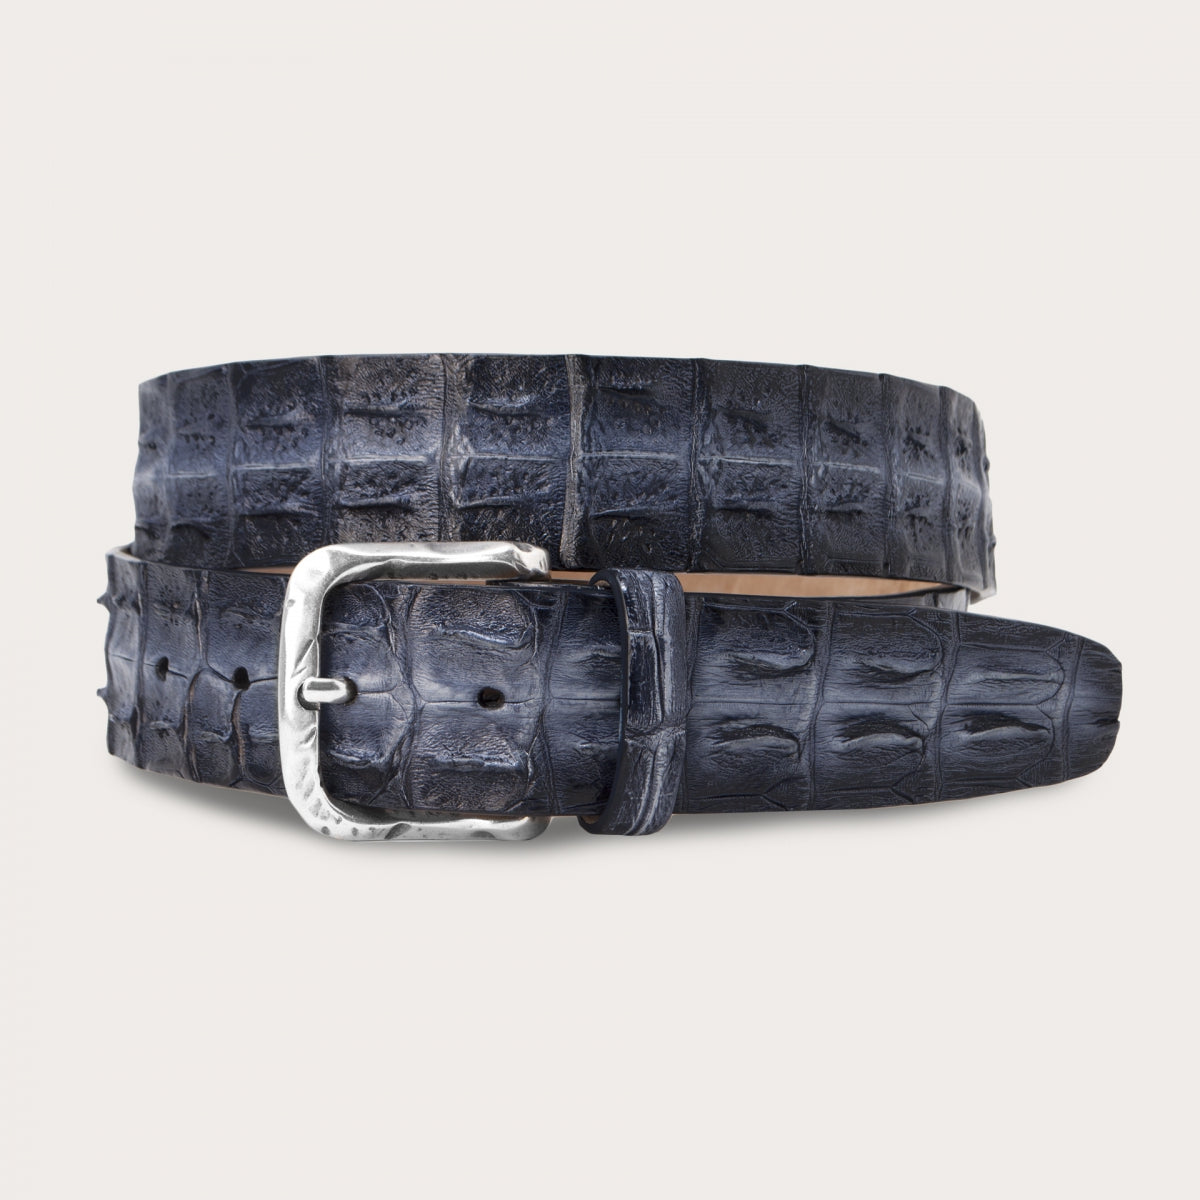 Hand-colored crocodile luxury belt with patina effect